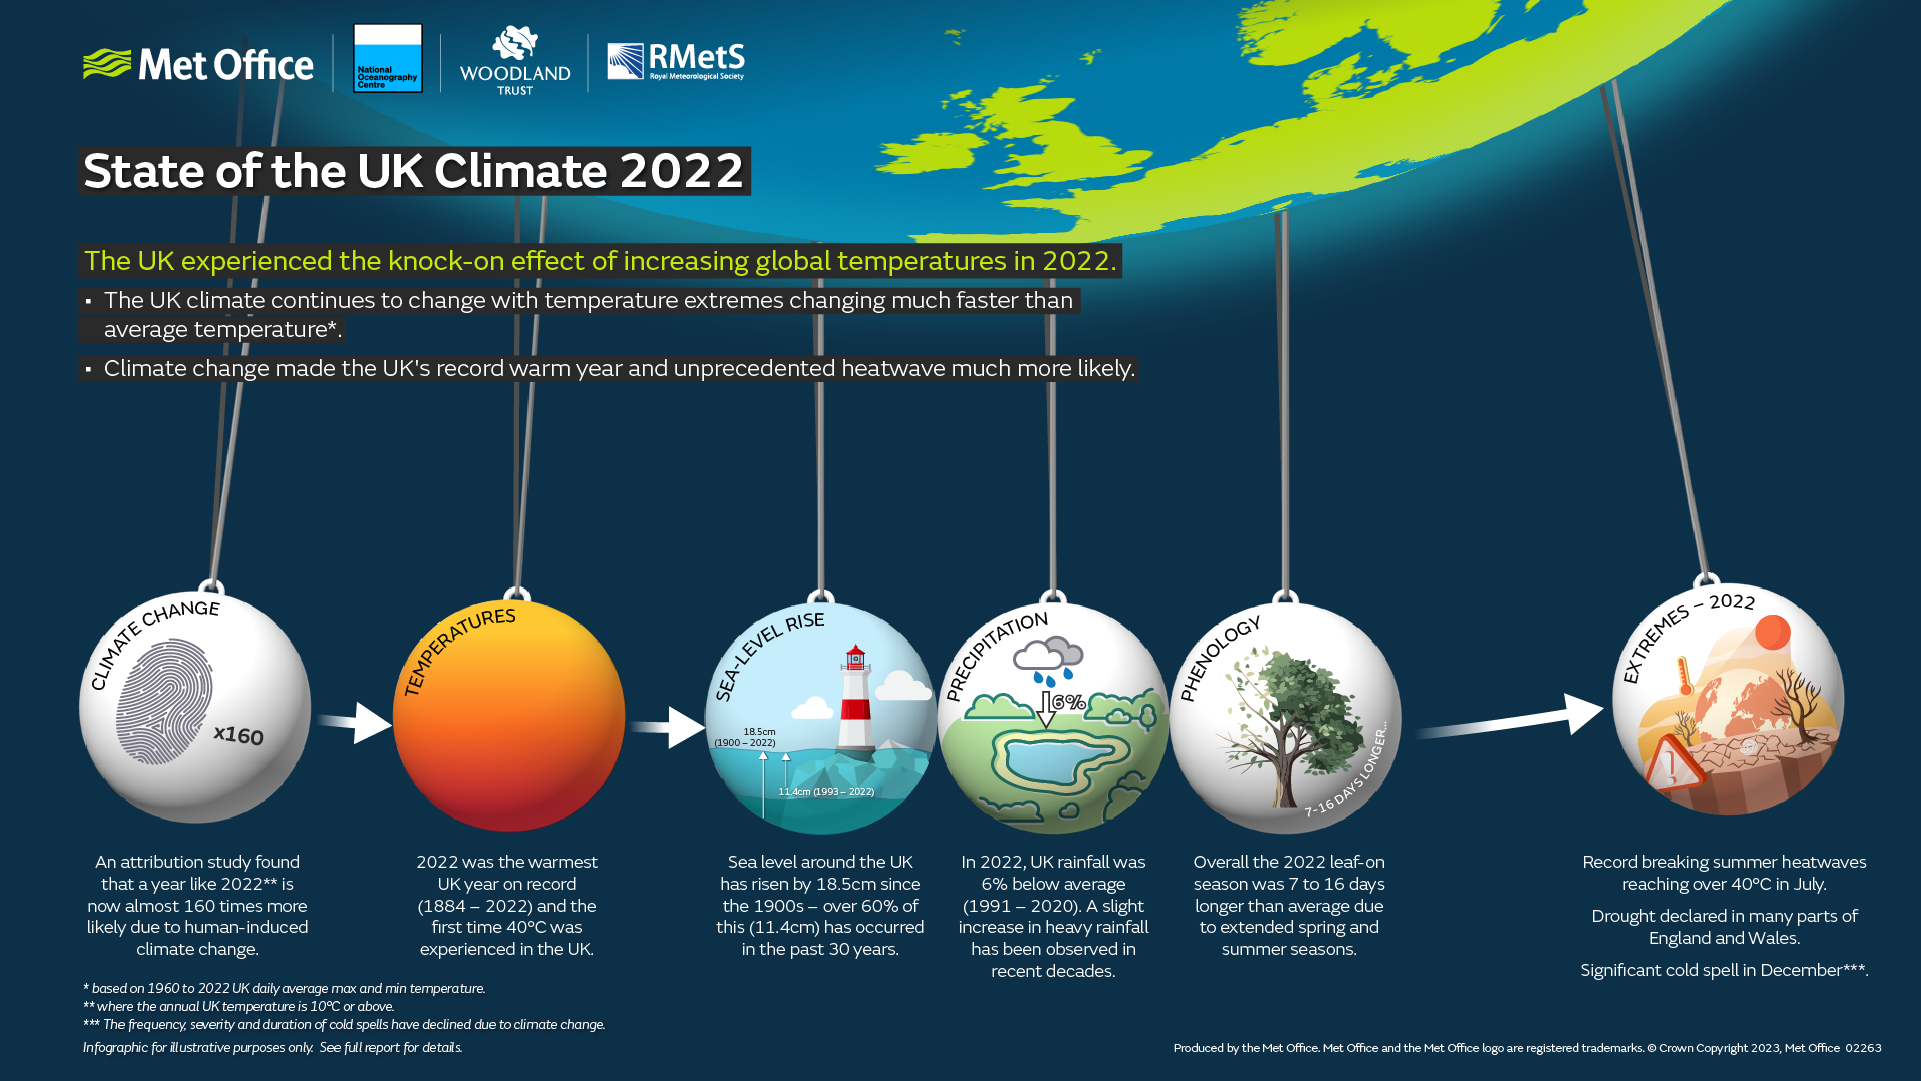 State of the UK Climate 2022 Infographic showing key findings from the report. Climate change is causing changes in temperatures, sea level, precipitation, phenology and extremes.